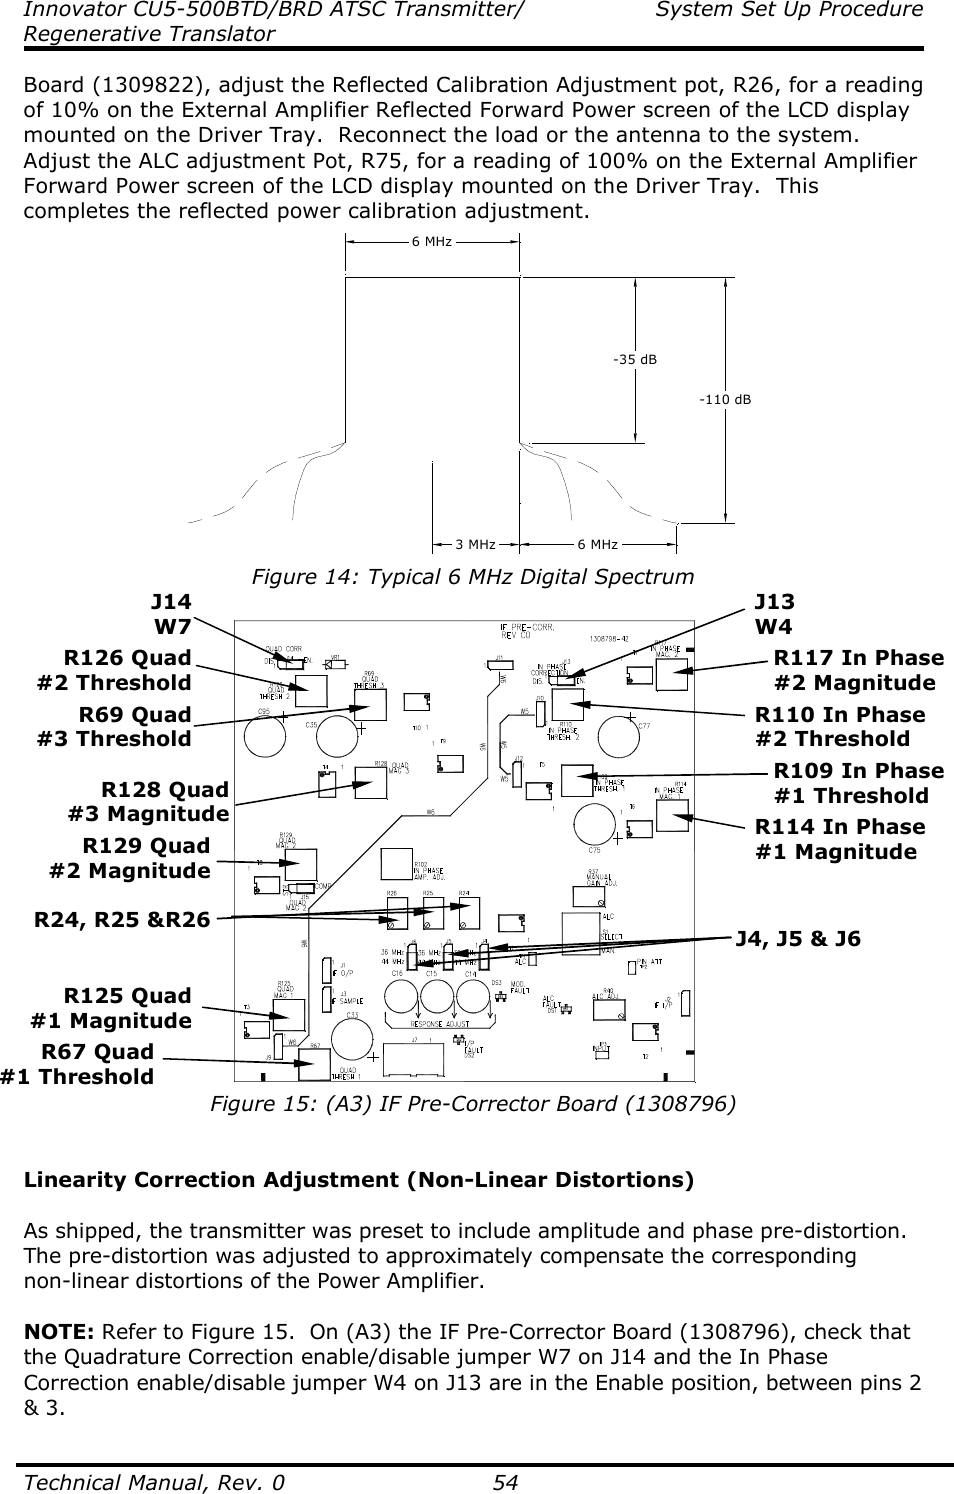 Innovator CU5-500BTD/BRD ATSC Transmitter/  System Set Up Procedure Regenerative Translator  Technical Manual, Rev. 0    54 Board (1309822), adjust the Reflected Calibration Adjustment pot, R26, for a reading of 10% on the External Amplifier Reflected Forward Power screen of the LCD display mounted on the Driver Tray.  Reconnect the load or the antenna to the system.  Adjust the ALC adjustment Pot, R75, for a reading of 100% on the External Amplifier Forward Power screen of the LCD display mounted on the Driver Tray.  This completes the reflected power calibration adjustment. 6 MHz-35 dB-110 dB3 MHz 6 MHz Figure 14: Typical 6 MHz Digital Spectrum   Figure 15: (A3) IF Pre-Corrector Board (1308796)   Linearity Correction Adjustment (Non-Linear Distortions)  As shipped, the transmitter was preset to include amplitude and phase pre-distortion. The pre-distortion was adjusted to approximately compensate the corresponding non-linear distortions of the Power Amplifier.  NOTE: Refer to Figure 15.  On (A3) the IF Pre-Corrector Board (1308796), check that the Quadrature Correction enable/disable jumper W7 on J14 and the In Phase Correction enable/disable jumper W4 on J13 are in the Enable position, between pins 2 &amp; 3. J13 W4 R67 Quad #1 Threshold J14 W7 R126 Quad #2 Threshold R24, R25 &amp;R26 J4, J5 &amp; J6 R69 Quad #3 Threshold R125 Quad #1 Magnitude R129 Quad #2 Magnitude R128 Quad #3 Magnitude R117 In Phase #2 Magnitude R110 In Phase #2 Threshold R109 In Phase #1 Threshold R114 In Phase #1 Magnitude 